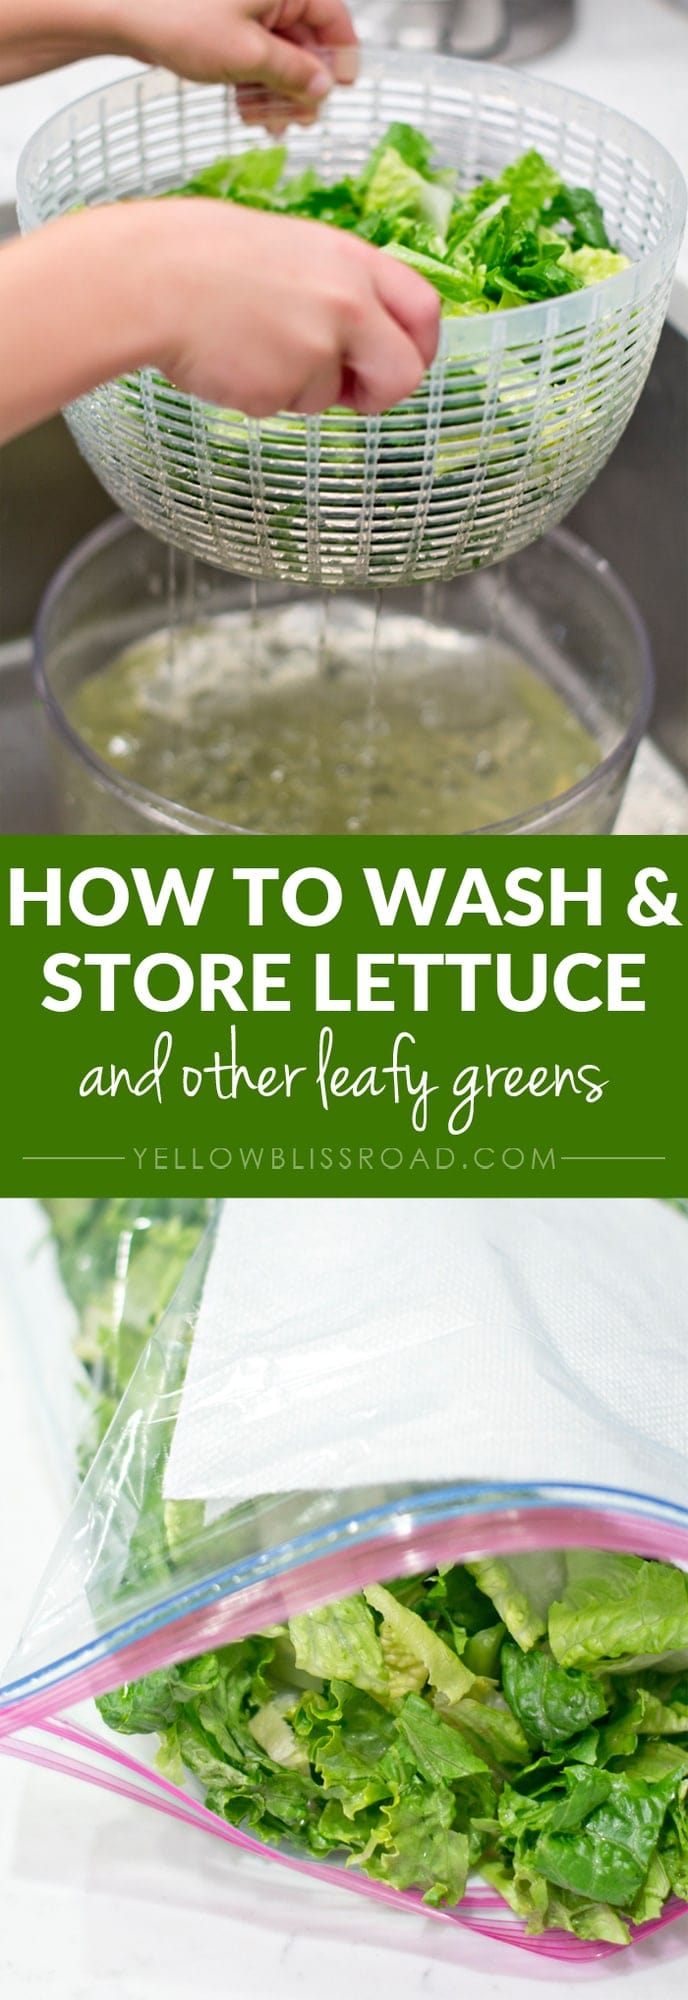 How to Properly Store Lettuce and Other Leafy Greens to keep them fresher longer